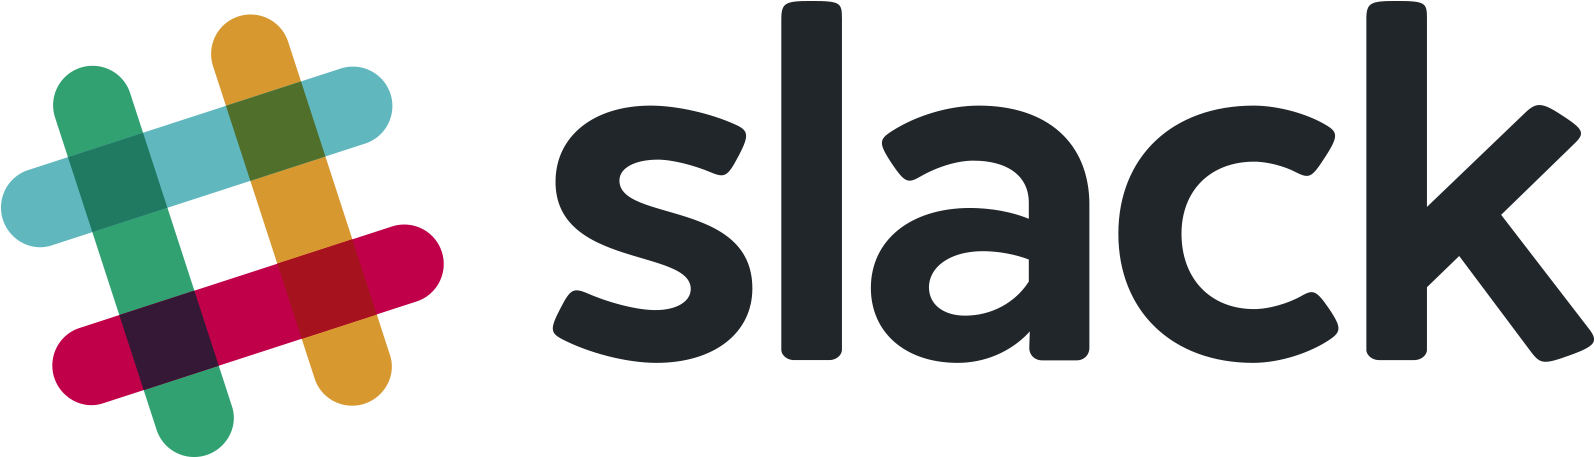 The Flipped Learning Network Has A Growing, Active - #slack Logo (1800x753)